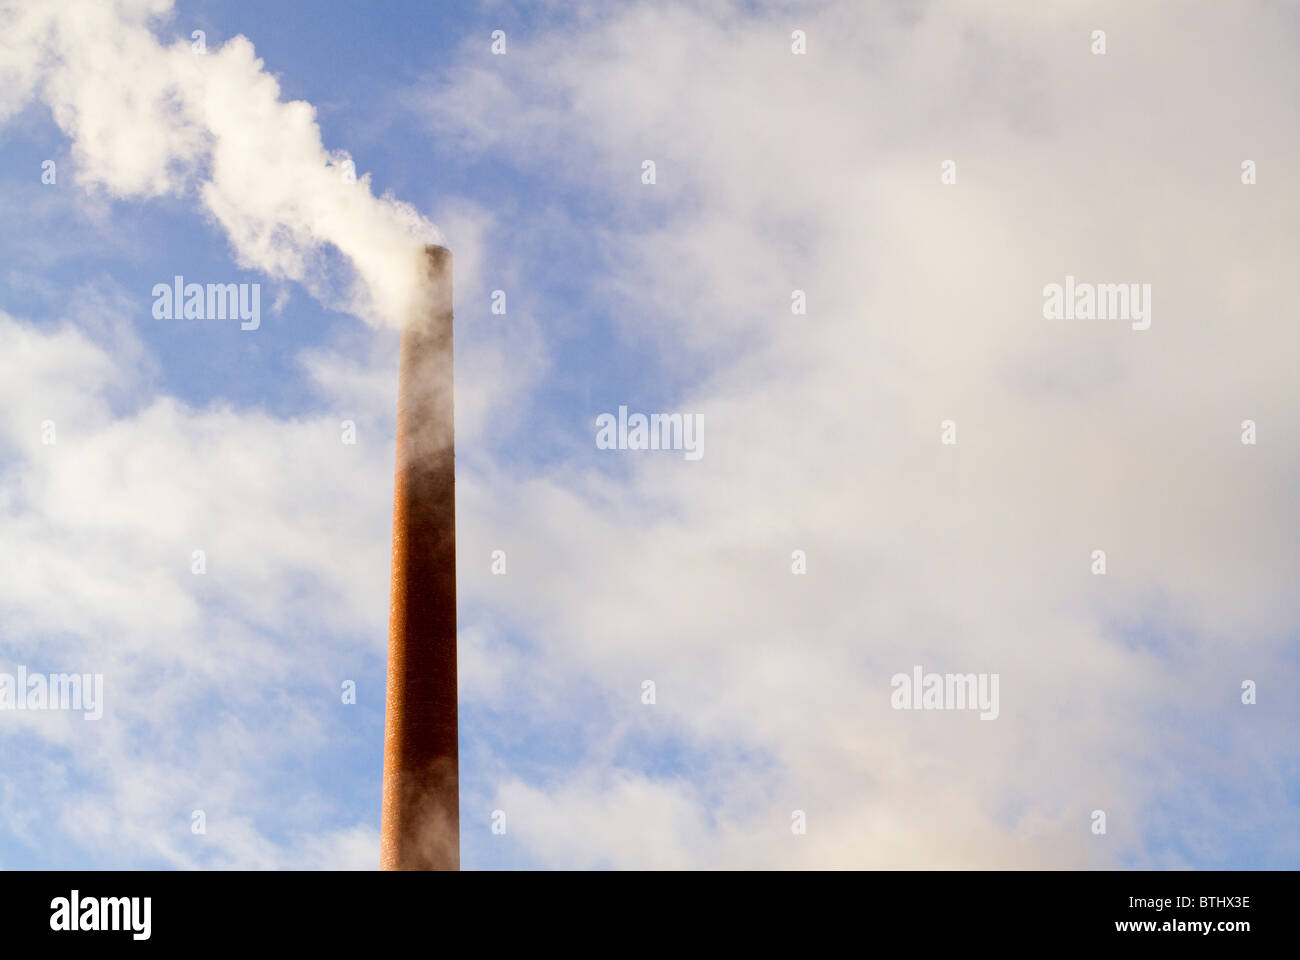 Redbrick chimney with steam and clouds Stock Photo